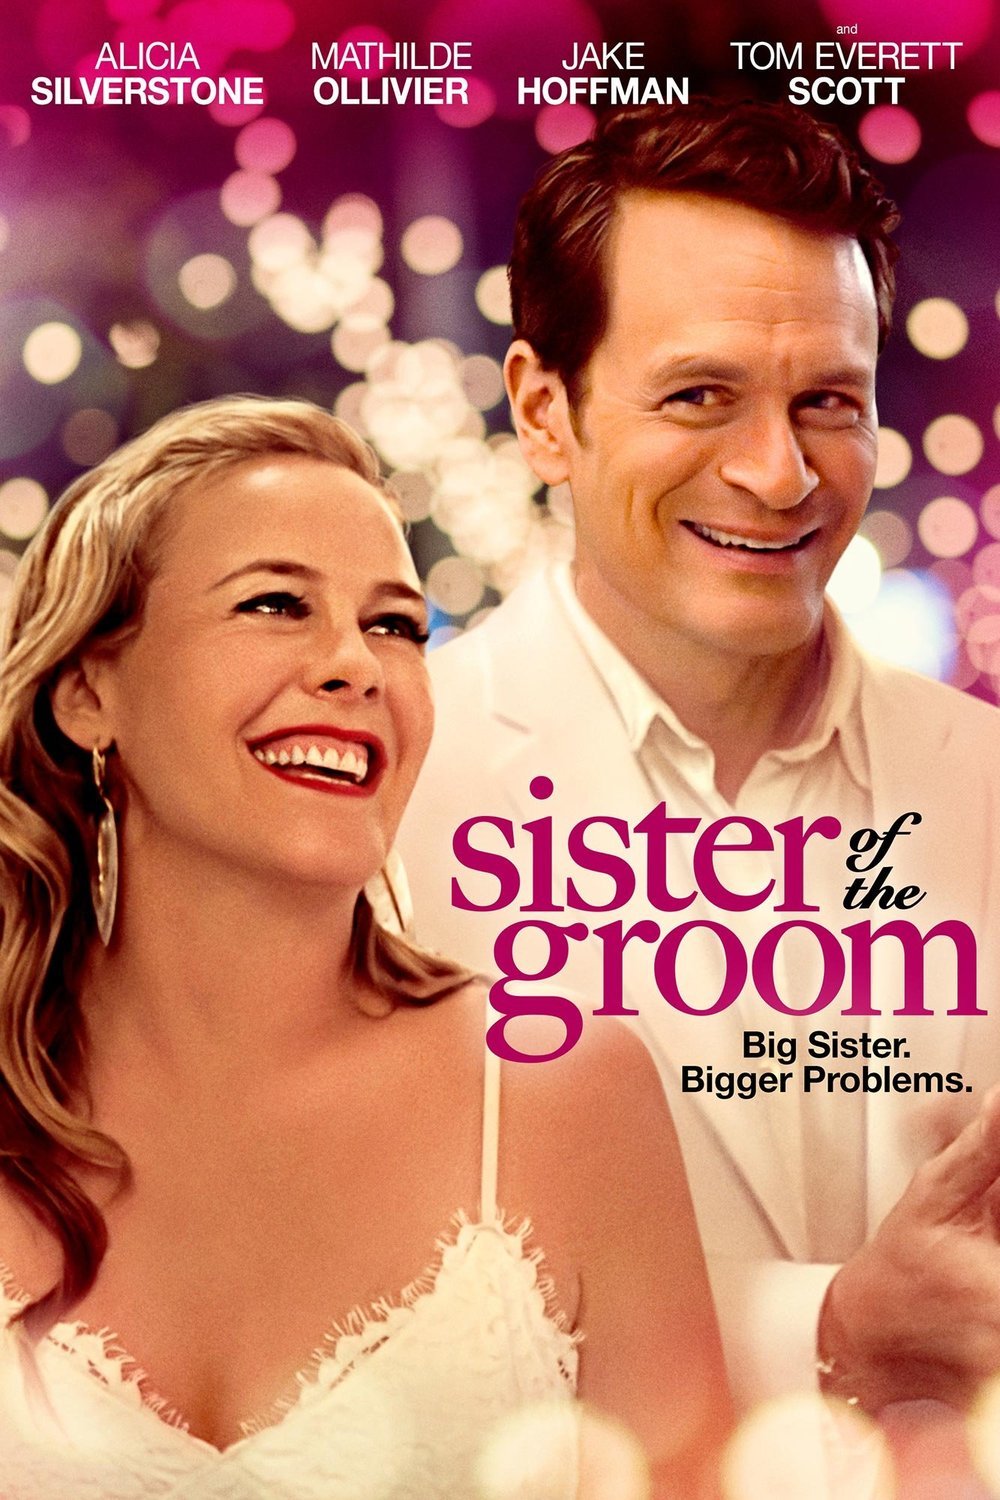 Poster of the movie Sister of the Groom